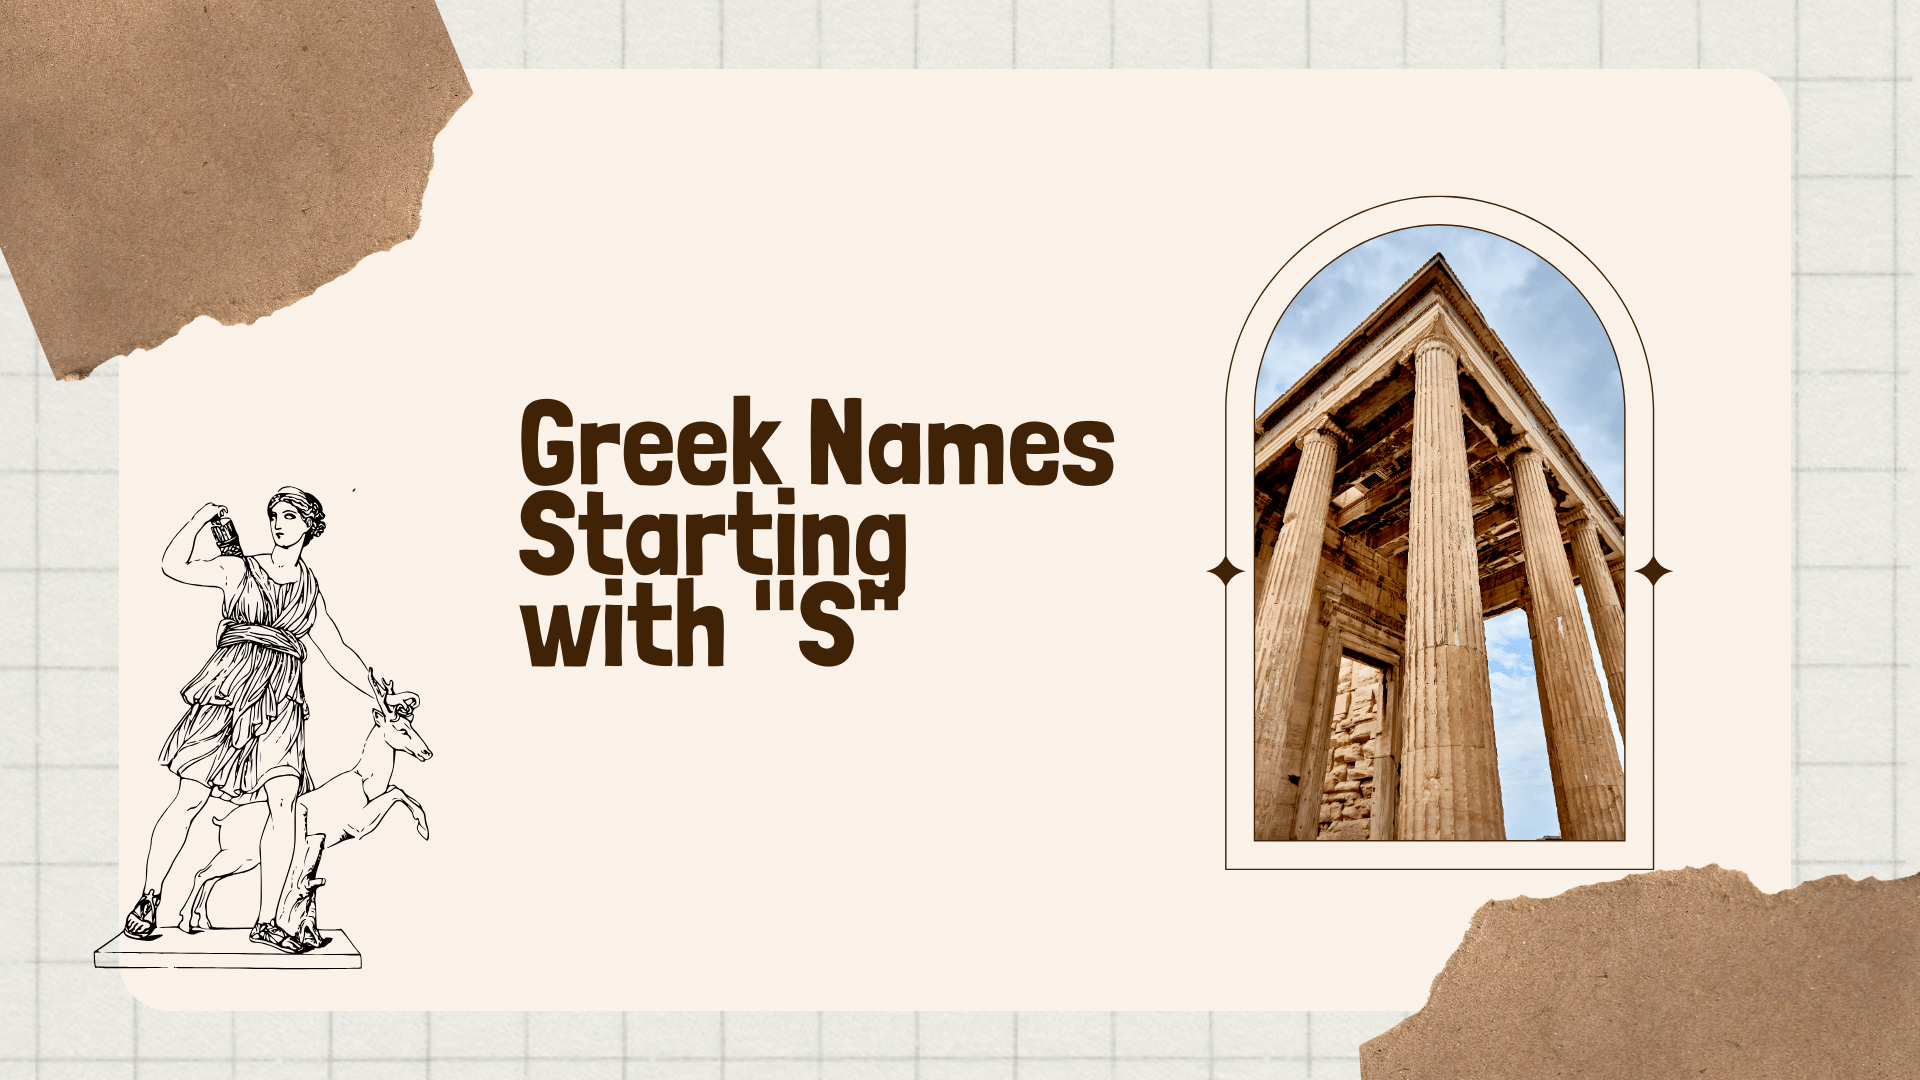 Greek Names Starting With "S"